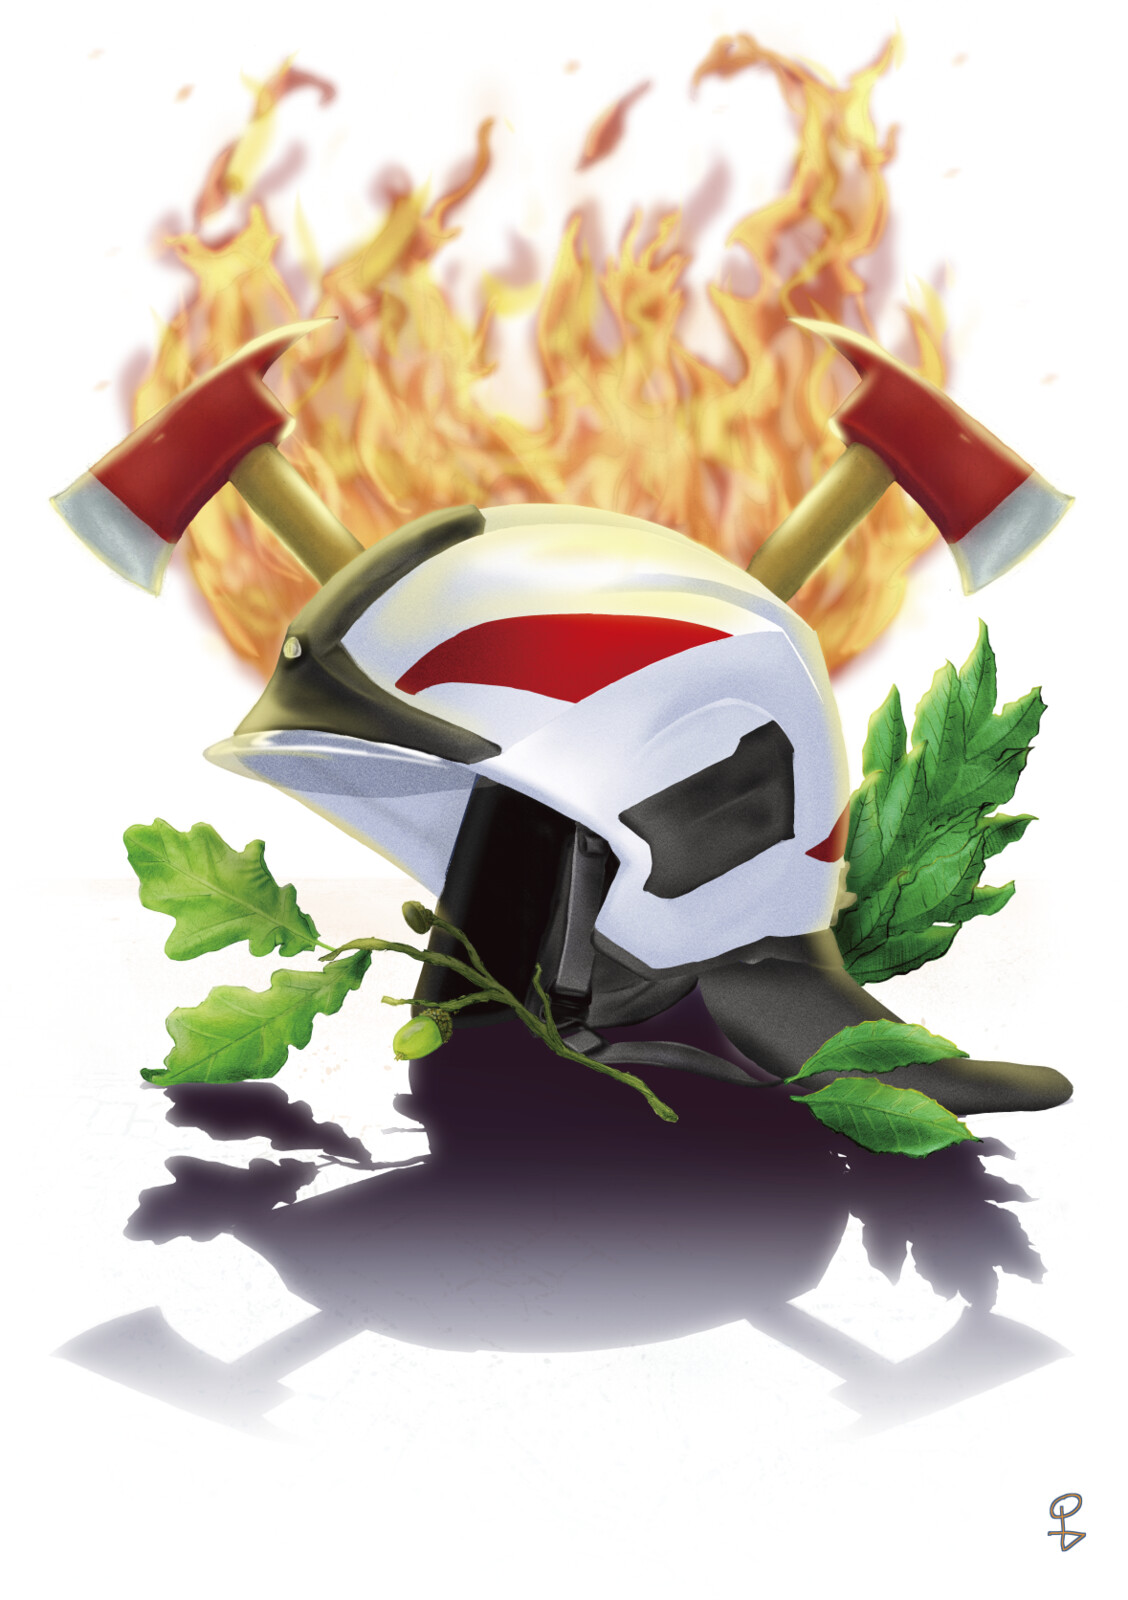 White helmet and flames